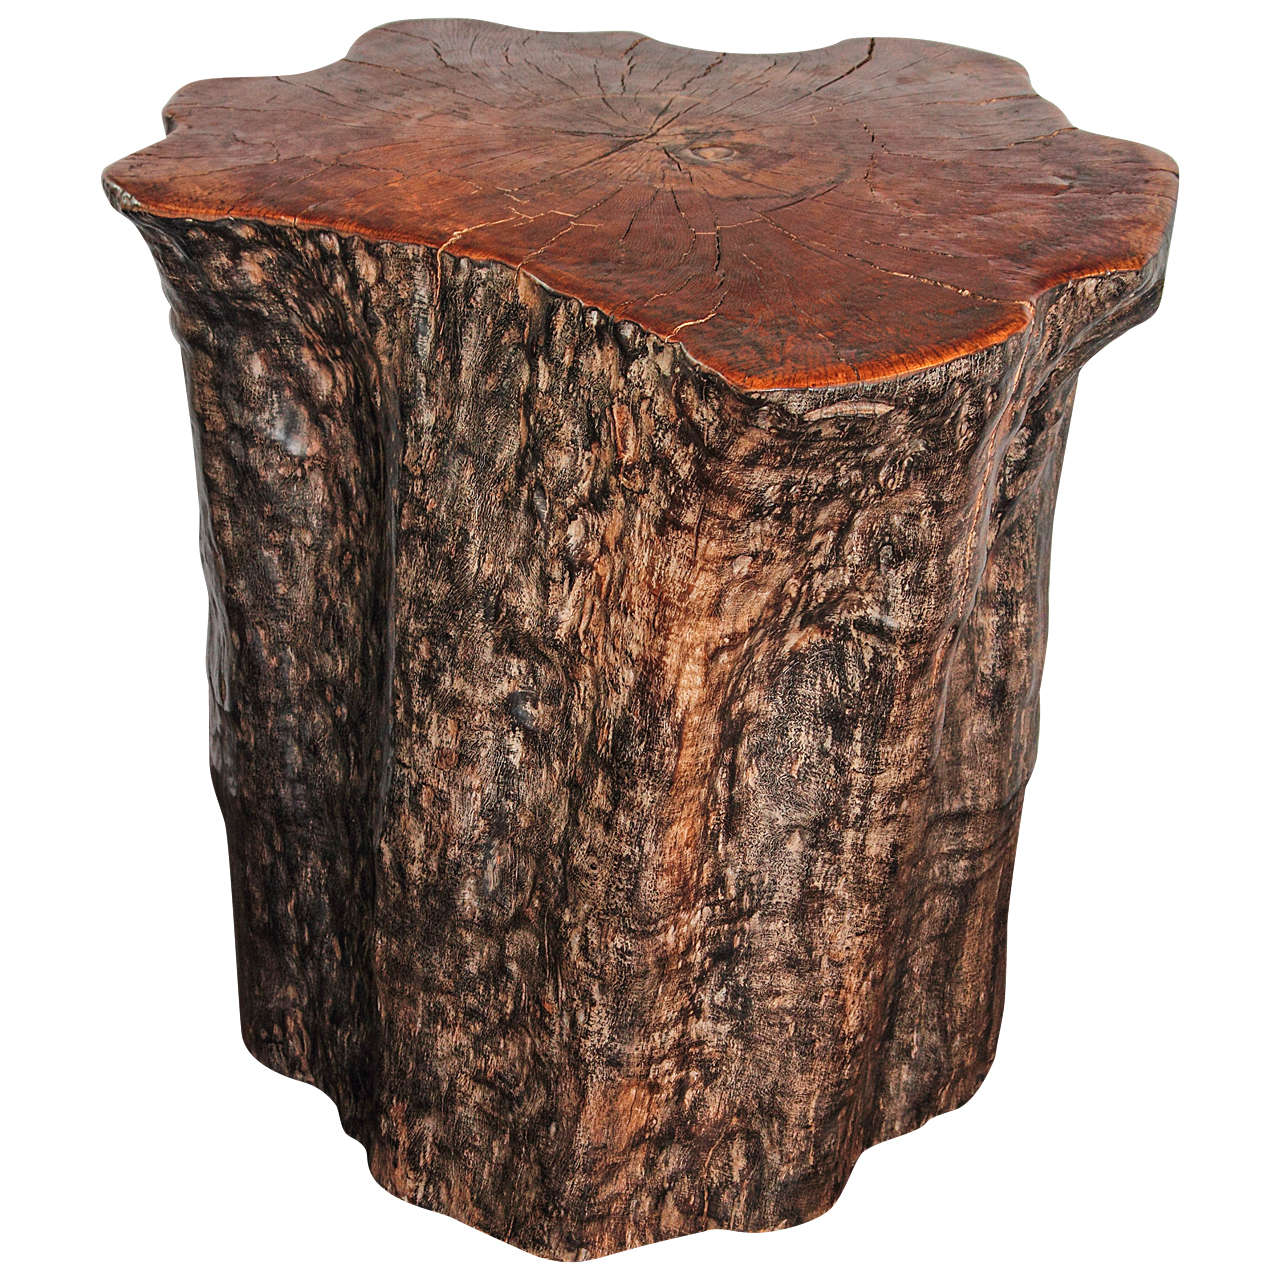 Organic Form Lychee Tree Trunk Pedestal Or End Table At 1stdibs